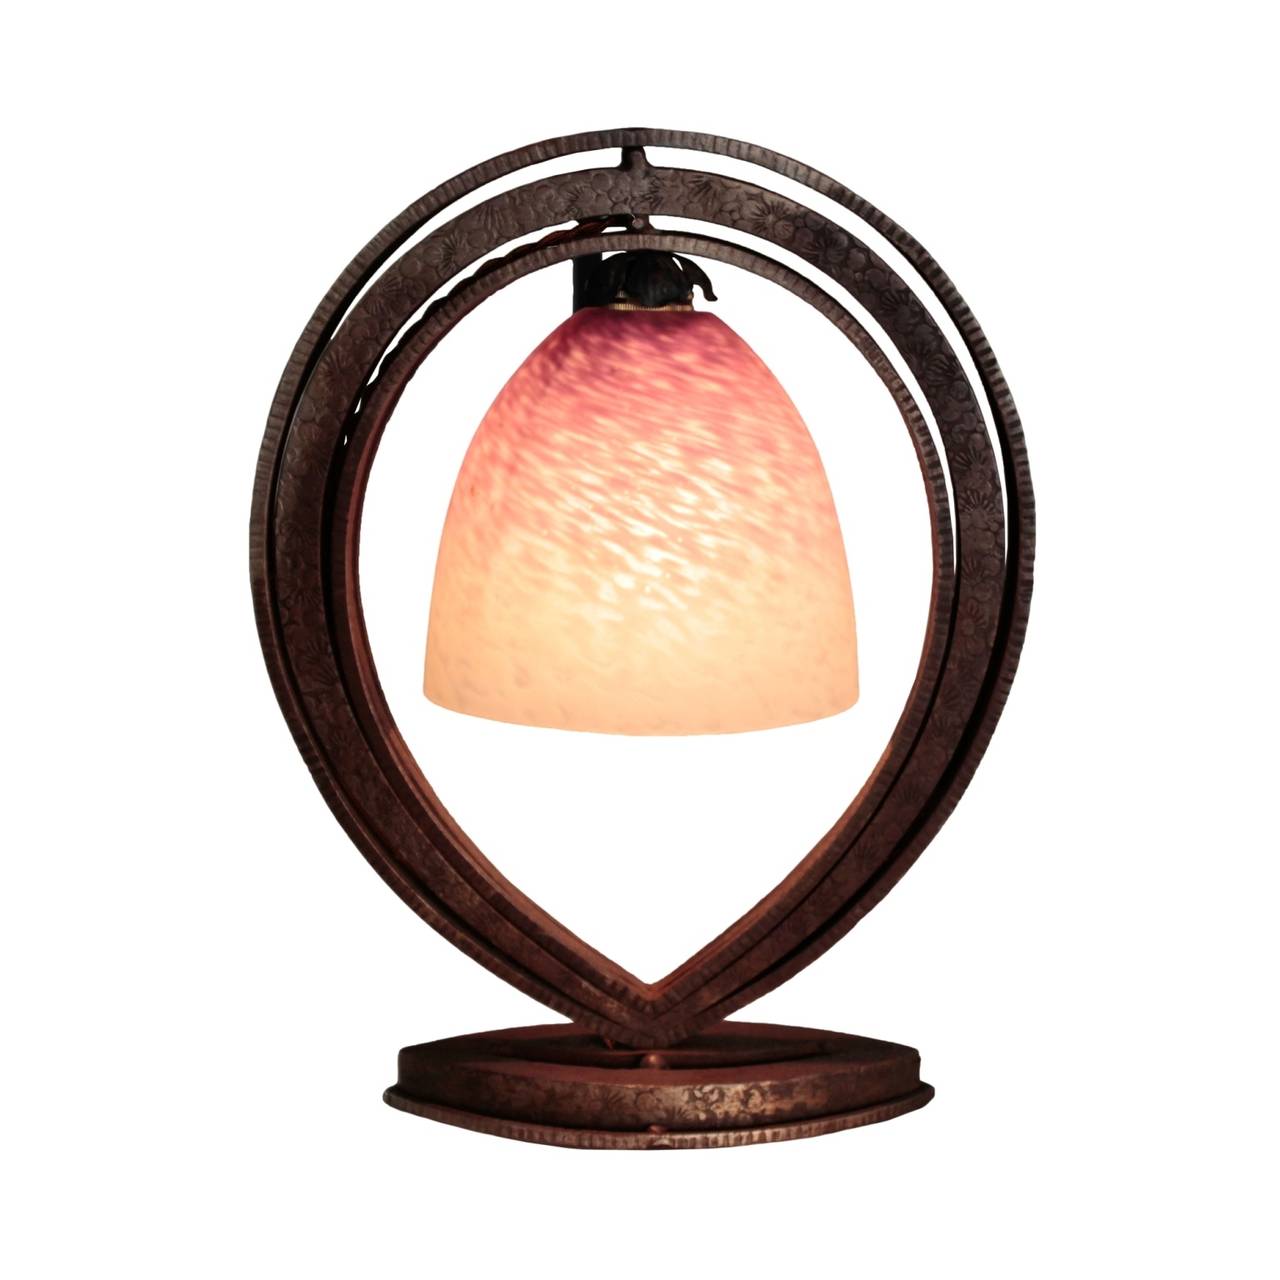 Mottled purple and white glass shade supported within a tri-layered fer forge (wrought iron) hoop with stamped flowers, on a stepped ellipsoid base with sharp points.